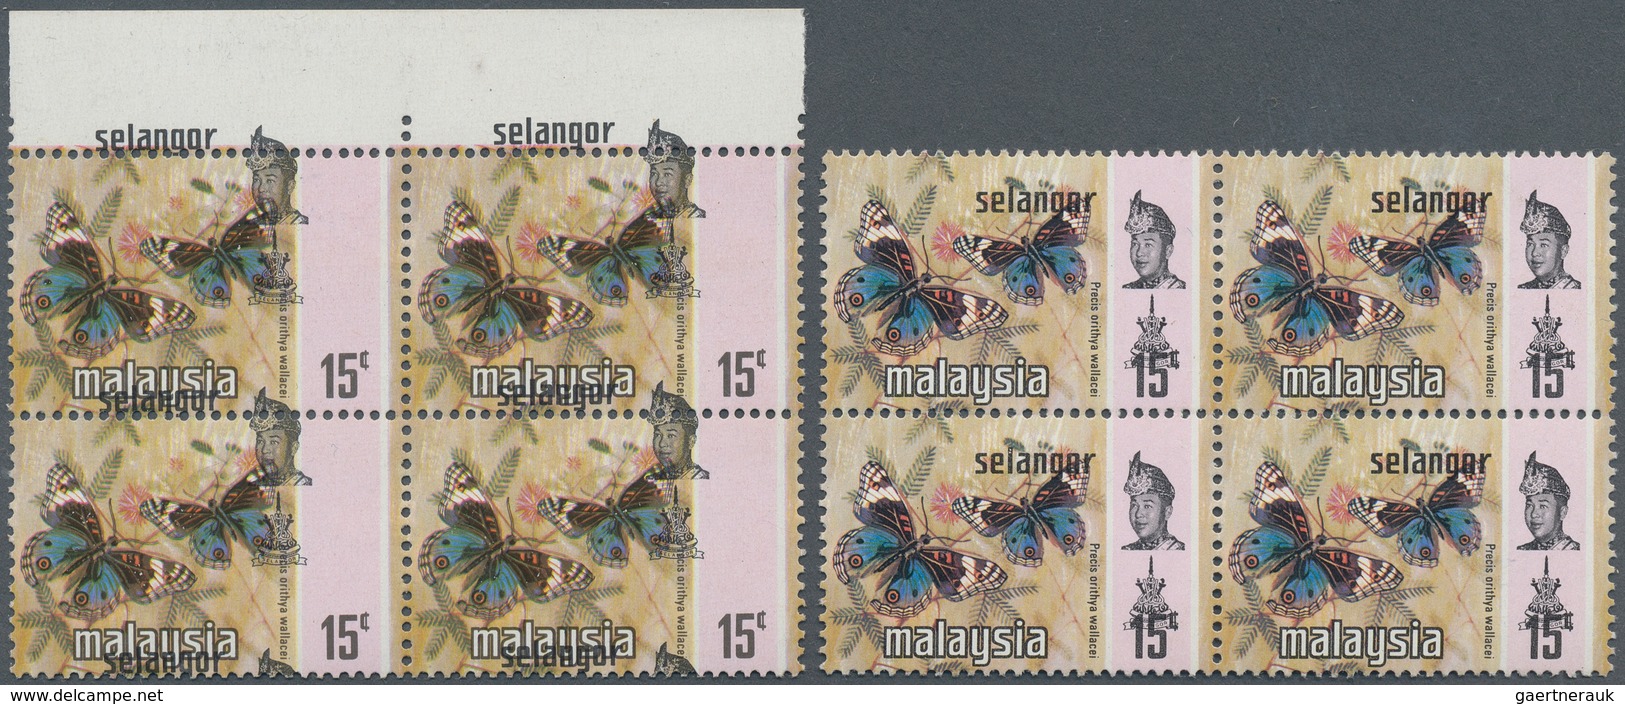 07400 Malaiische Staaten - Selangor: 1971, 15c. Blue Pansy Butterfly, Two Blocks Of Four Showing Shifted I - Selangor